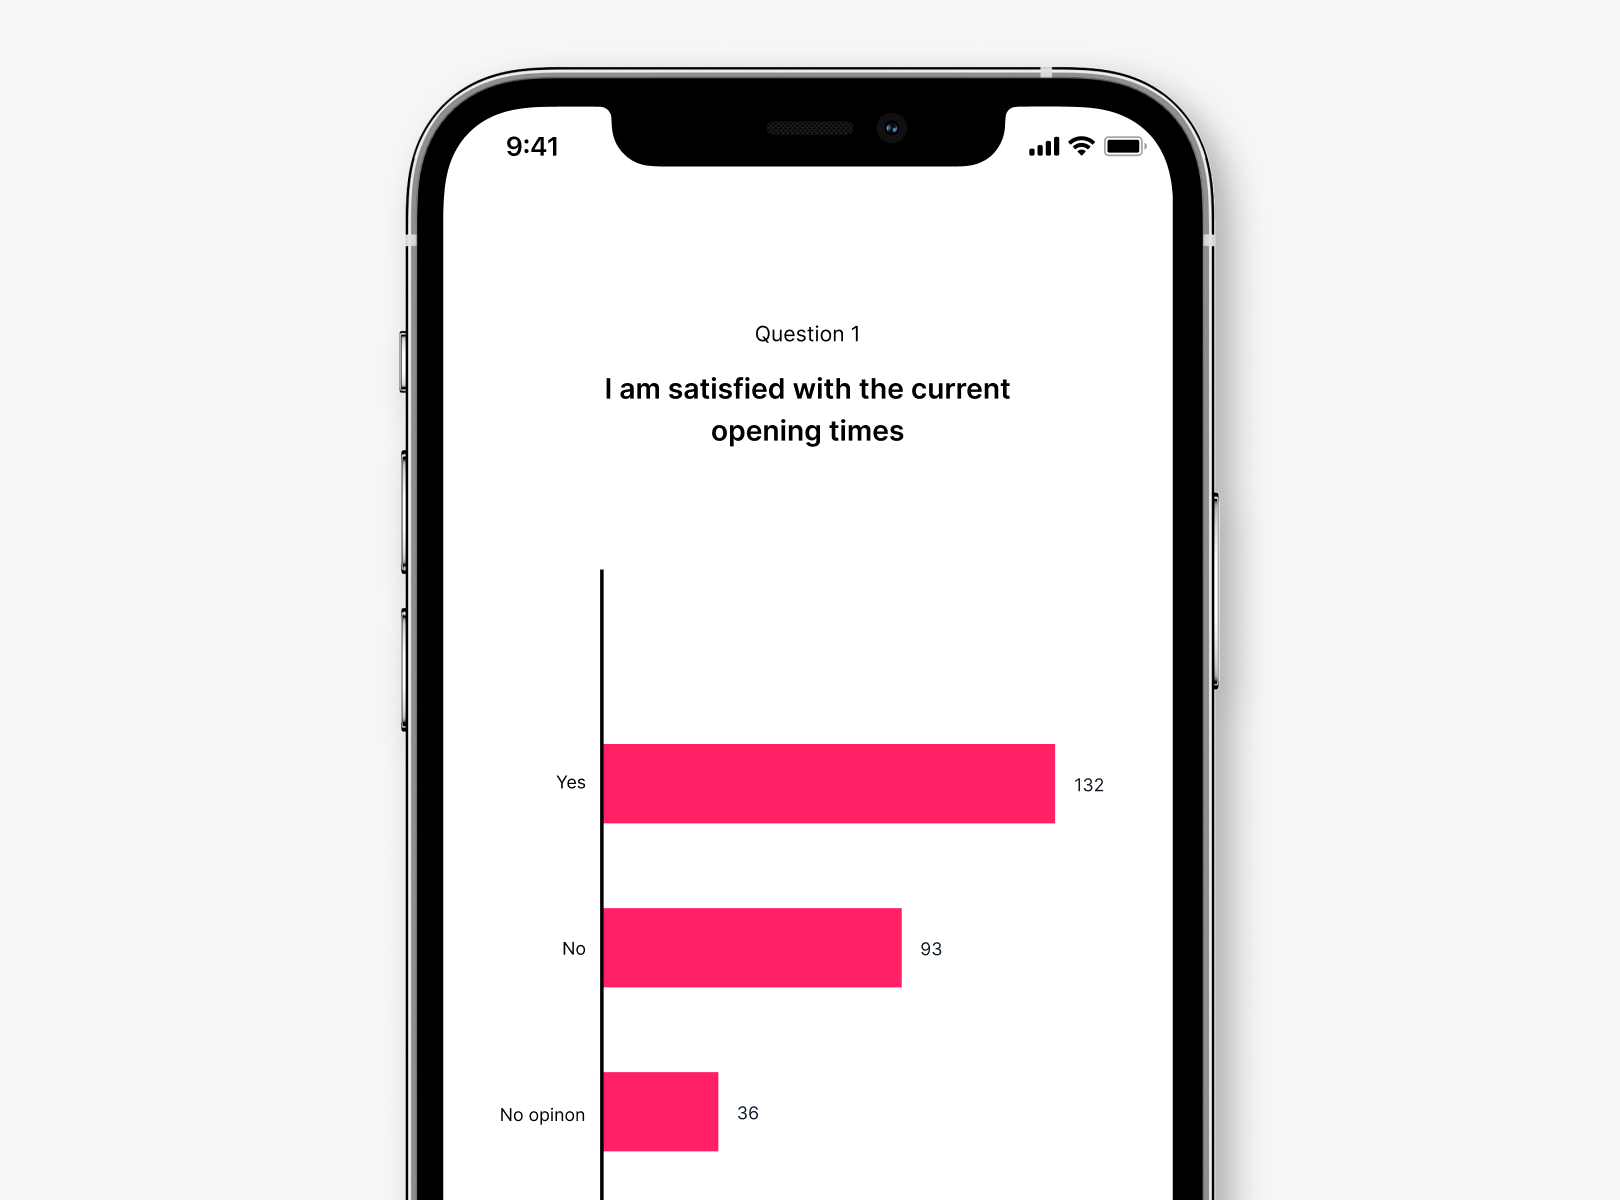 Survey question and results shown as bar graph on phone screen